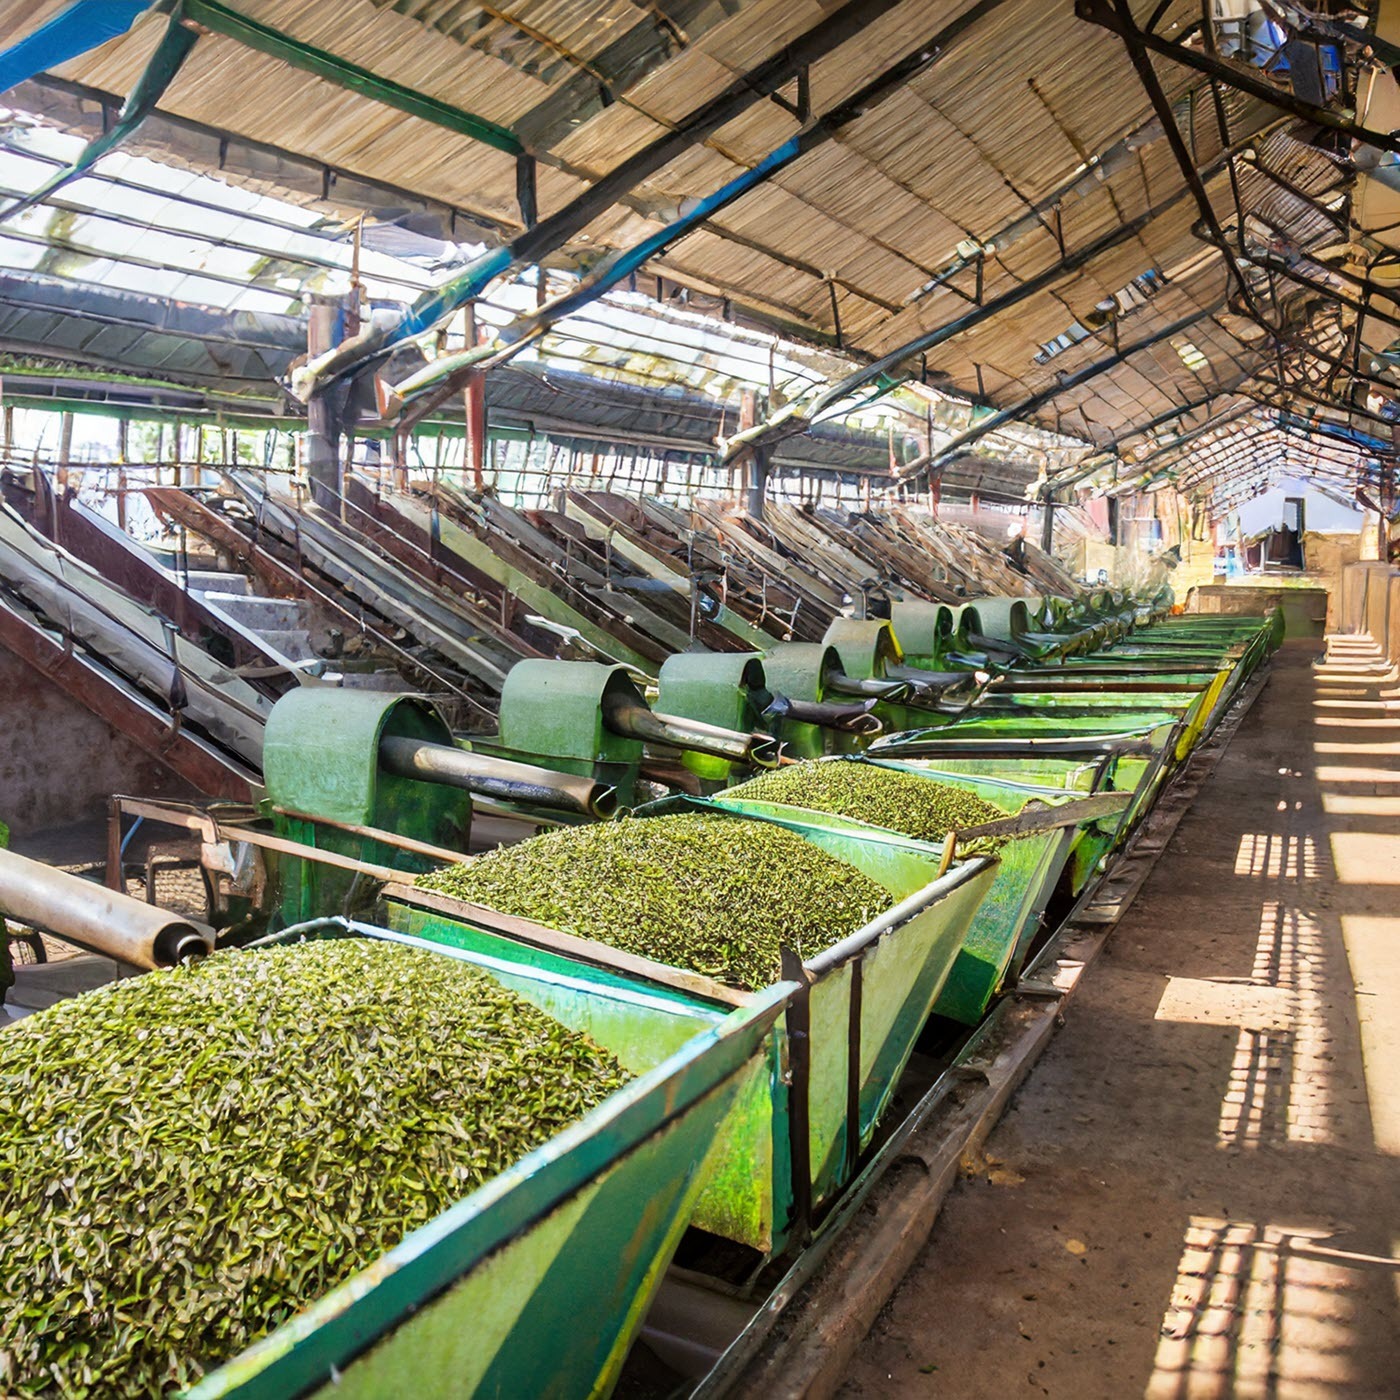 Ep 162 | India Bought-Leaf Factories Resume Processing | Three World Tea Expo Takeaways | Sustainably Grown Tea is Nears a Quarter of Global Production